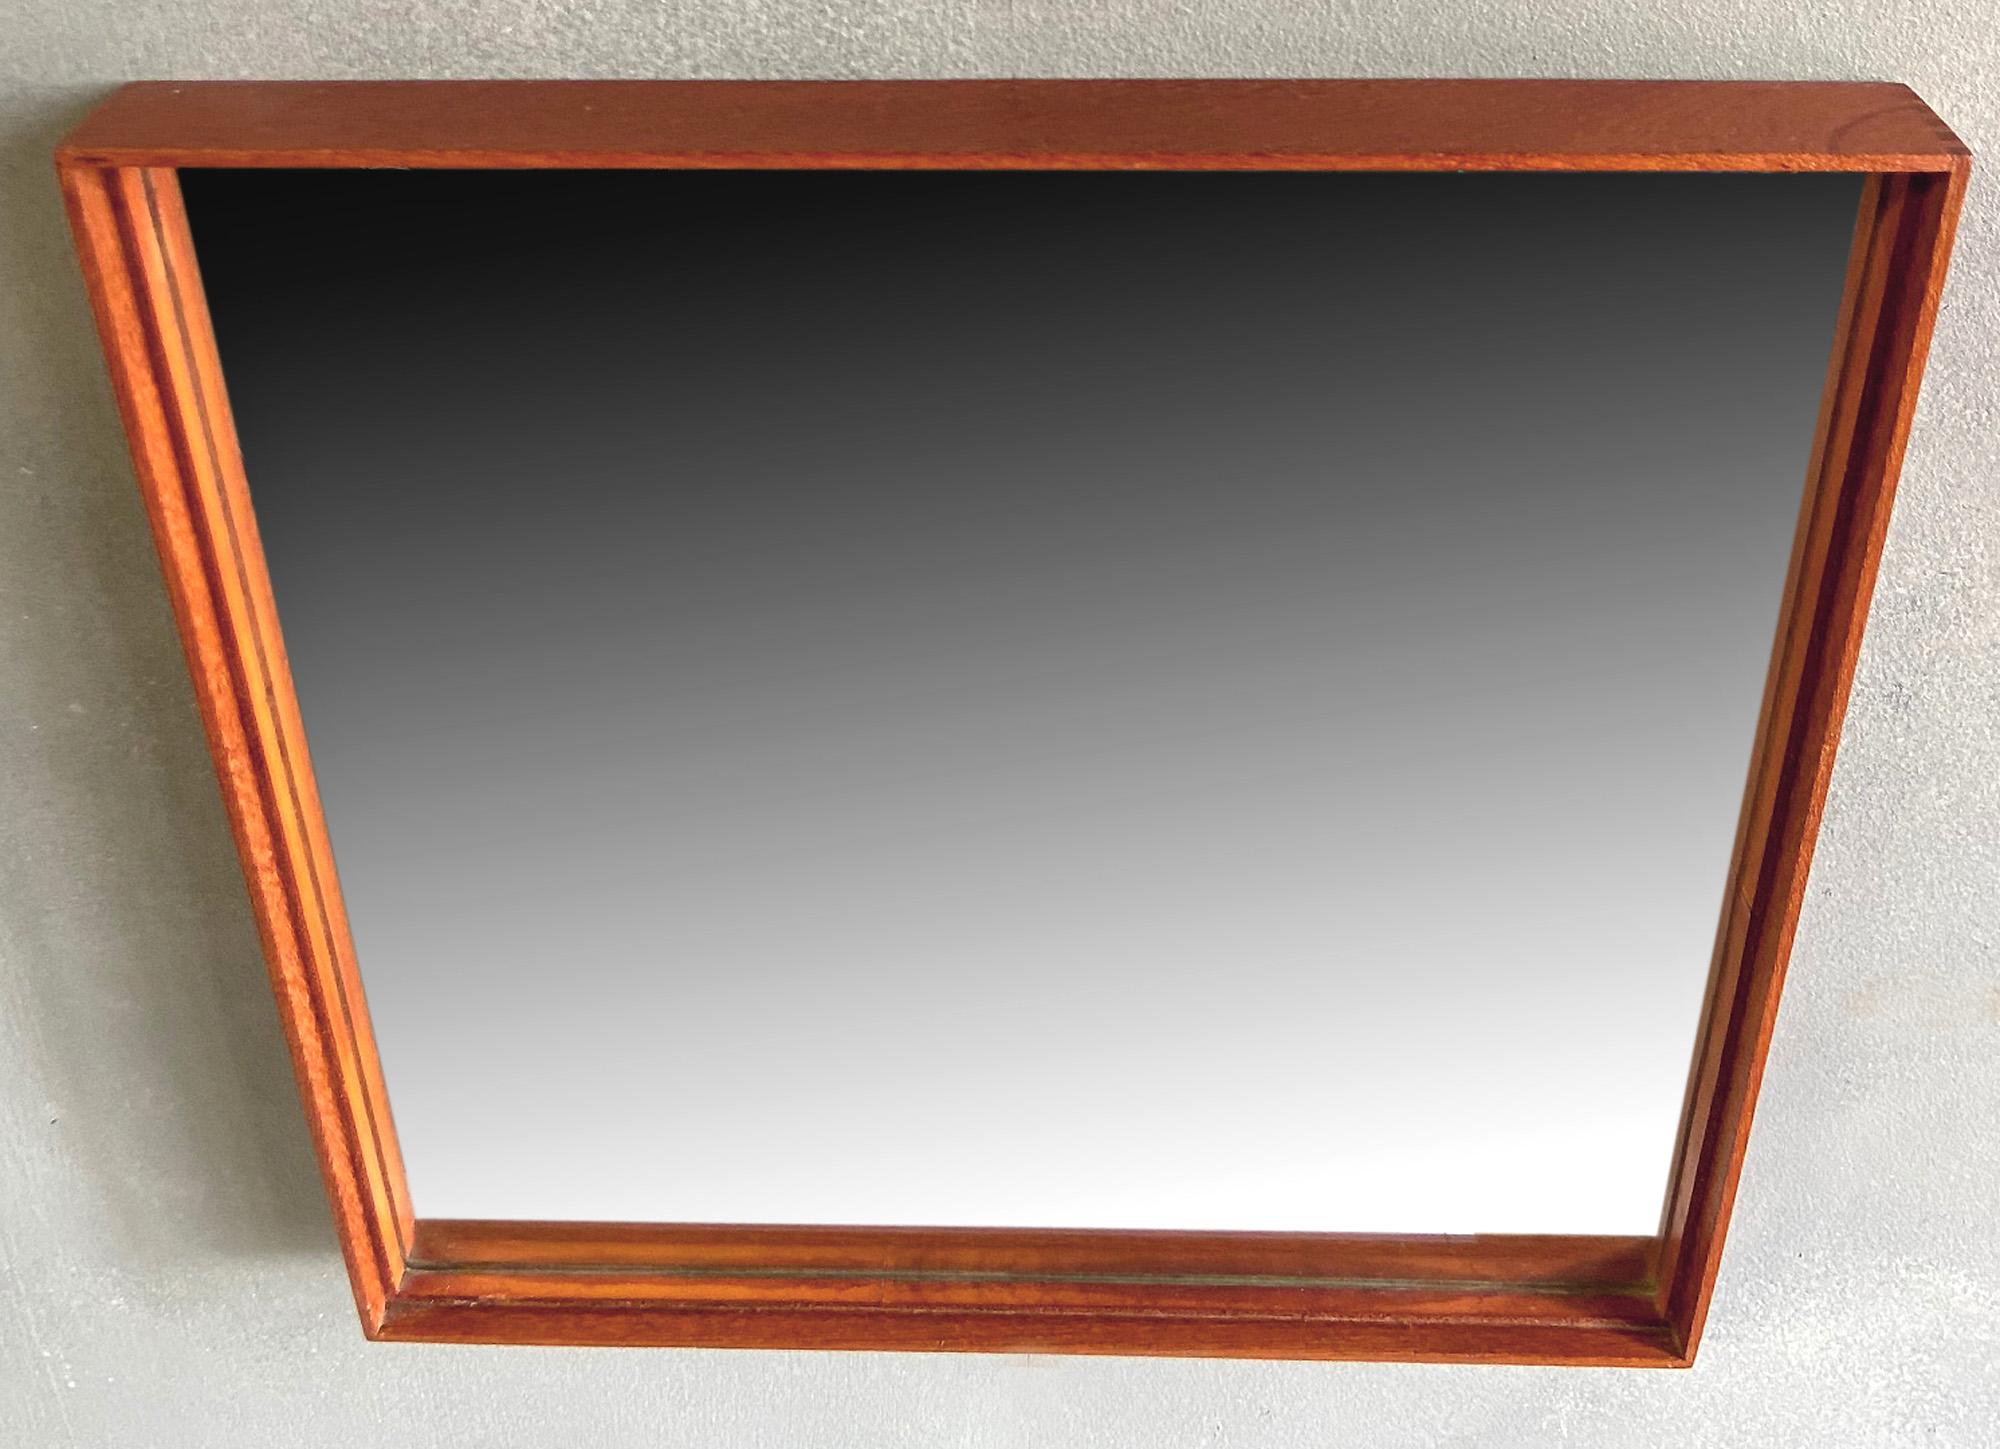 Midcentury Teak Mirror by Uno & Osten Kristiansson for Glas Mäster In Good Condition For Sale In BROOKLYN, NY